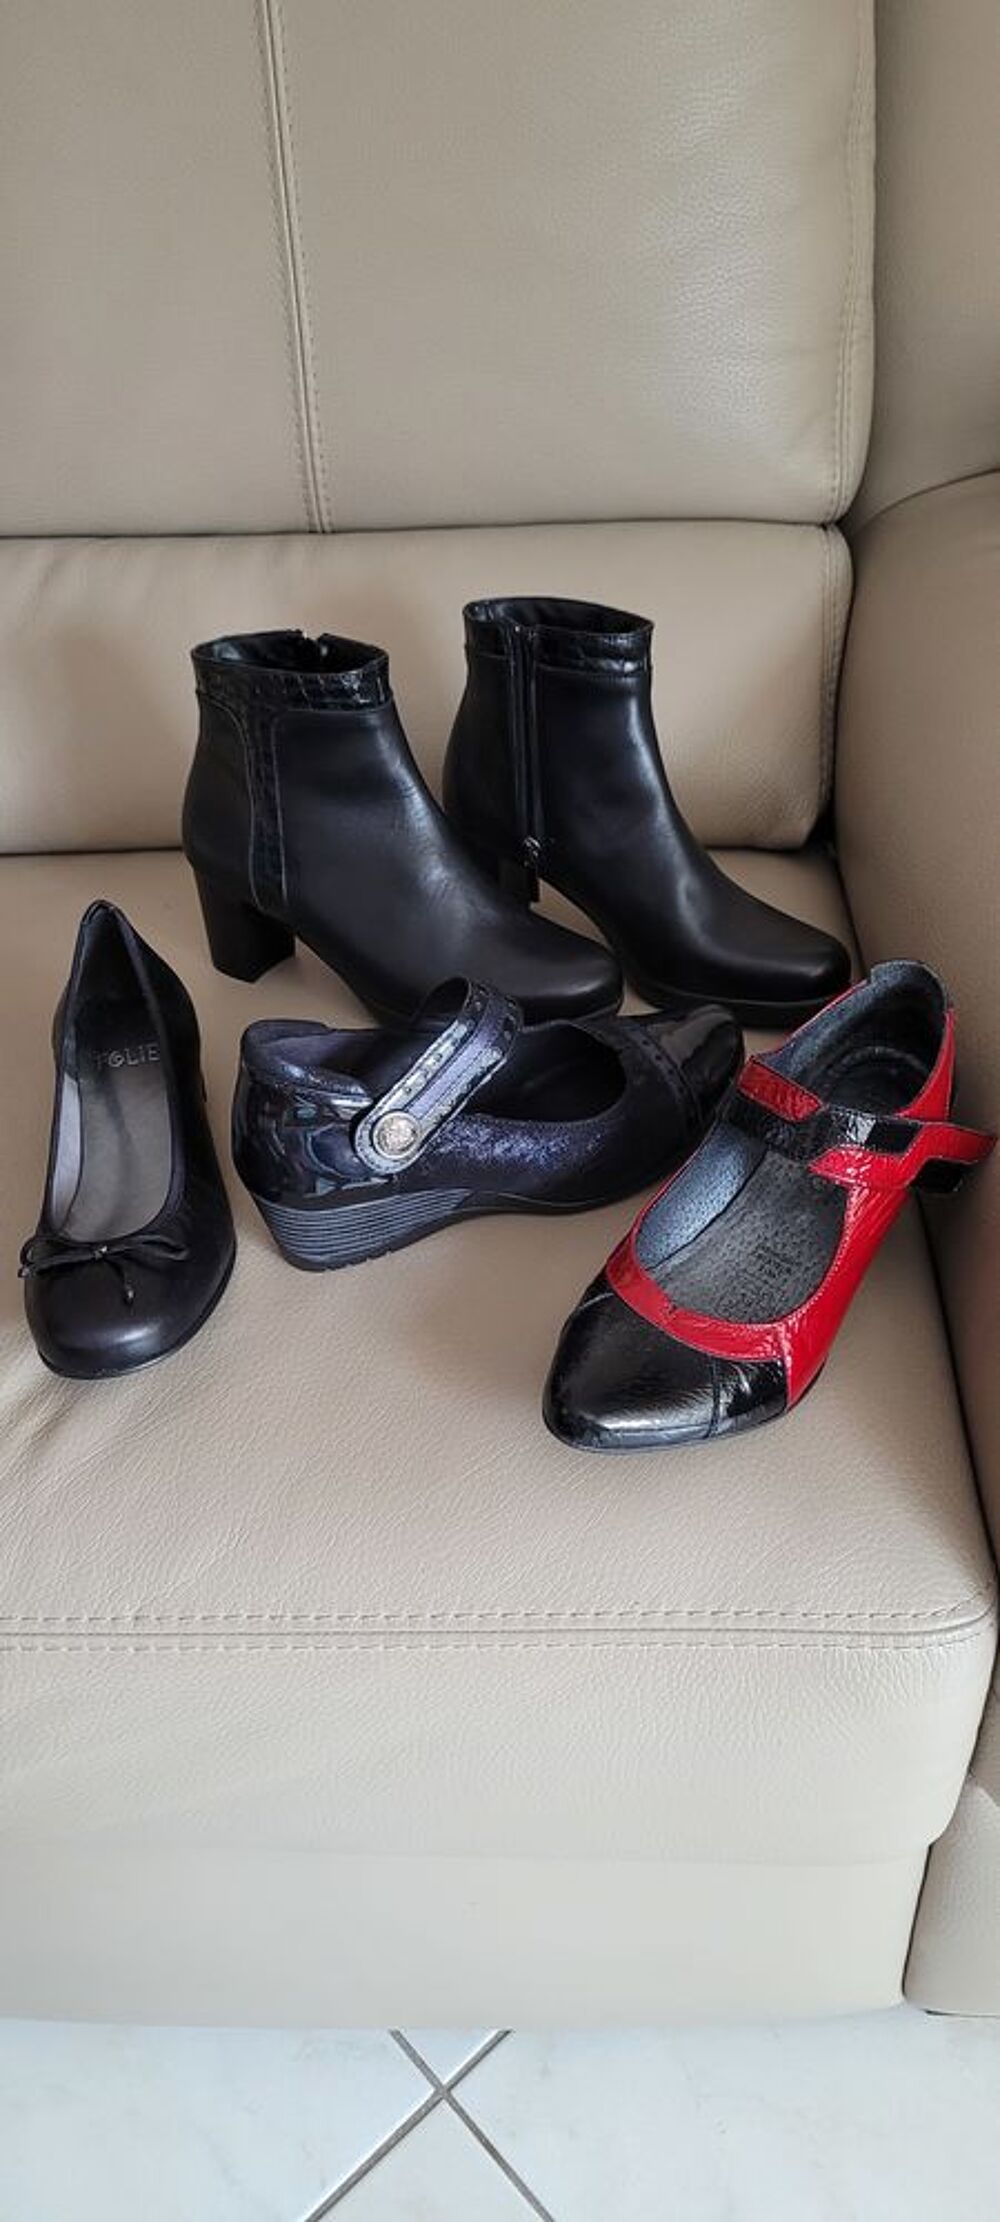 4 paires chaussures neuves Chaussures